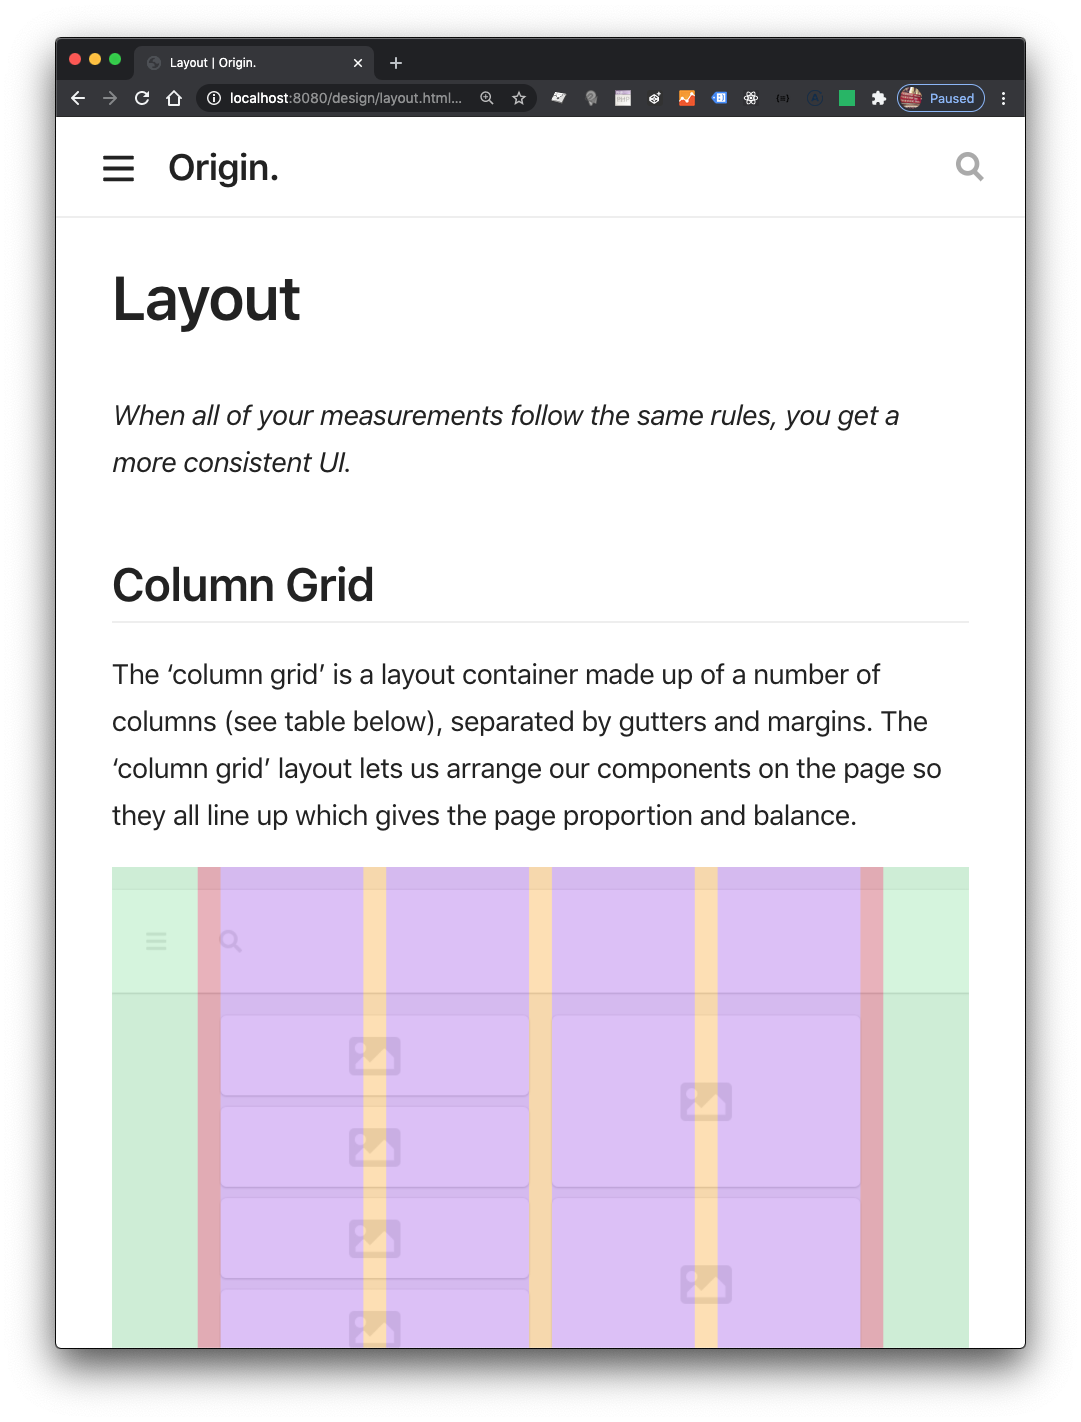 Detail of the Column Grid sub-section from Origin's Layout System